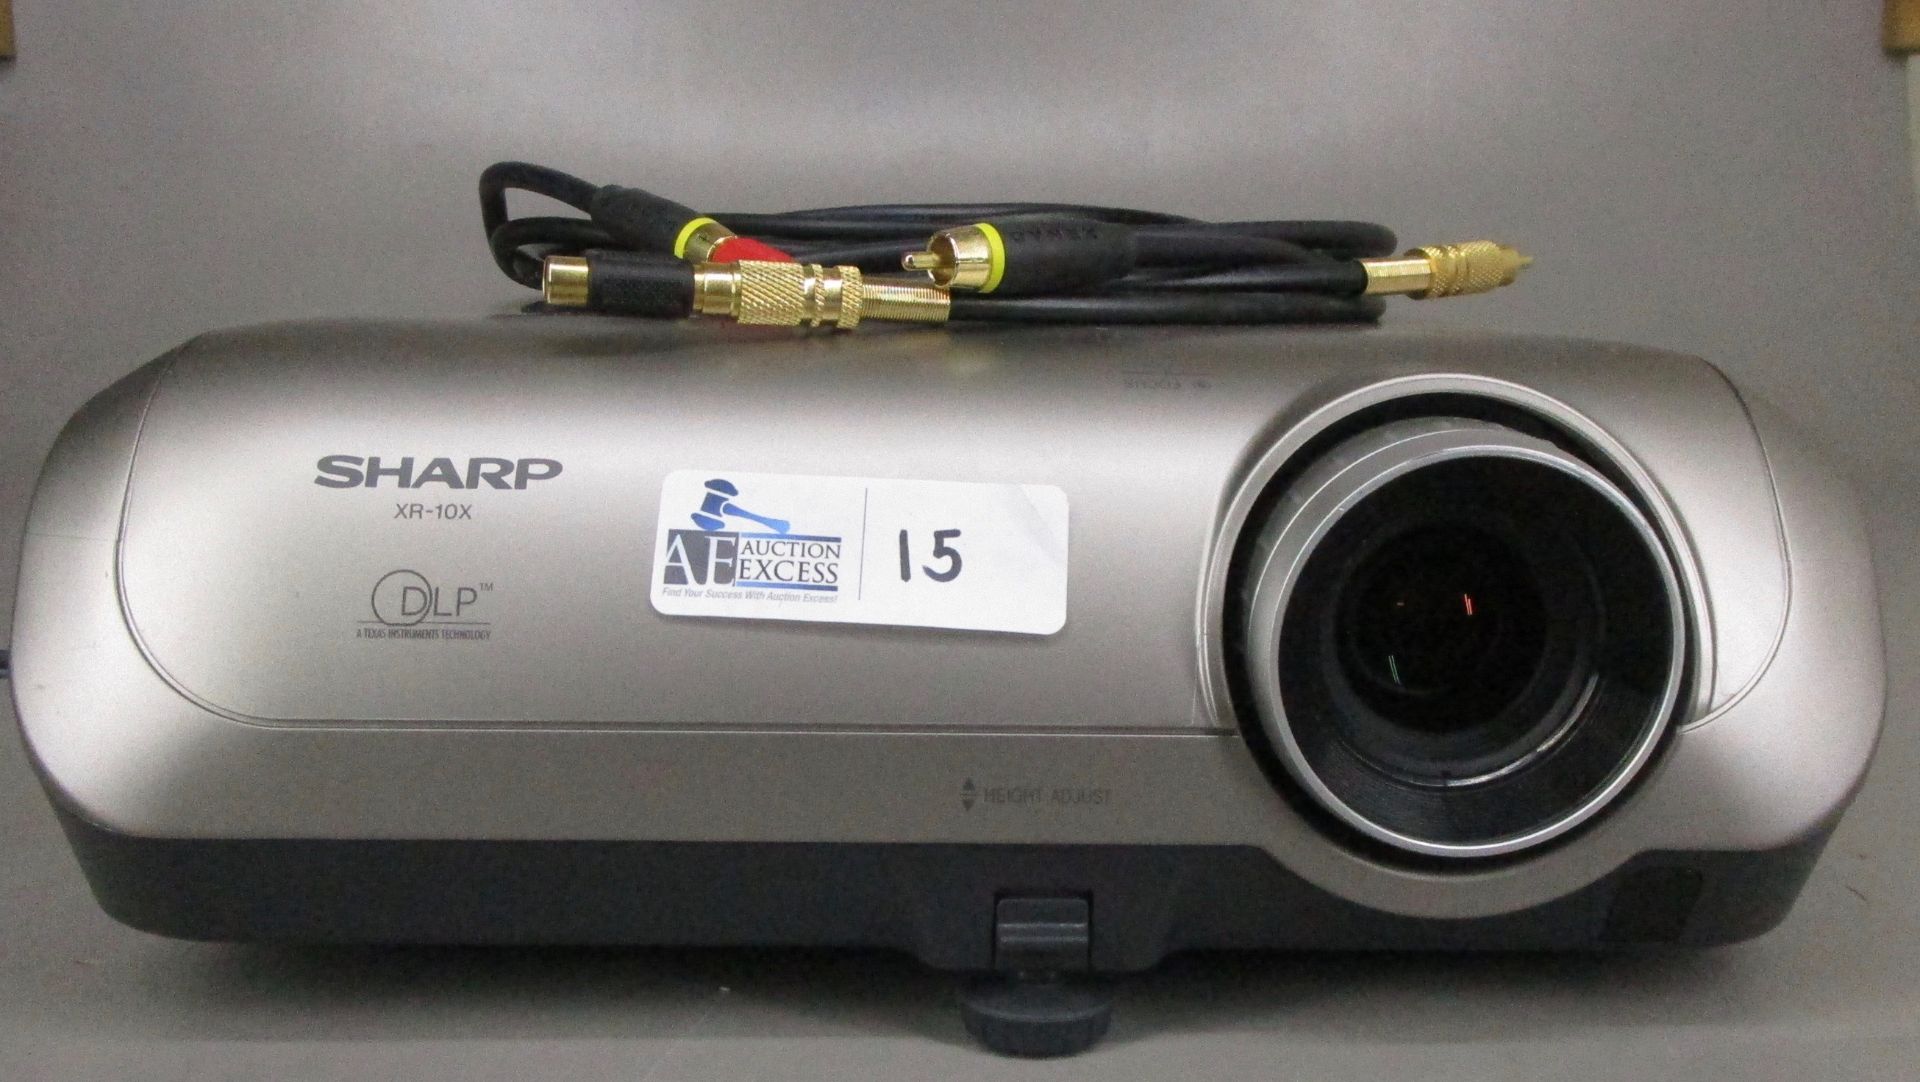 NOTE VISION PROJECTOR XR-10X - Image 2 of 3